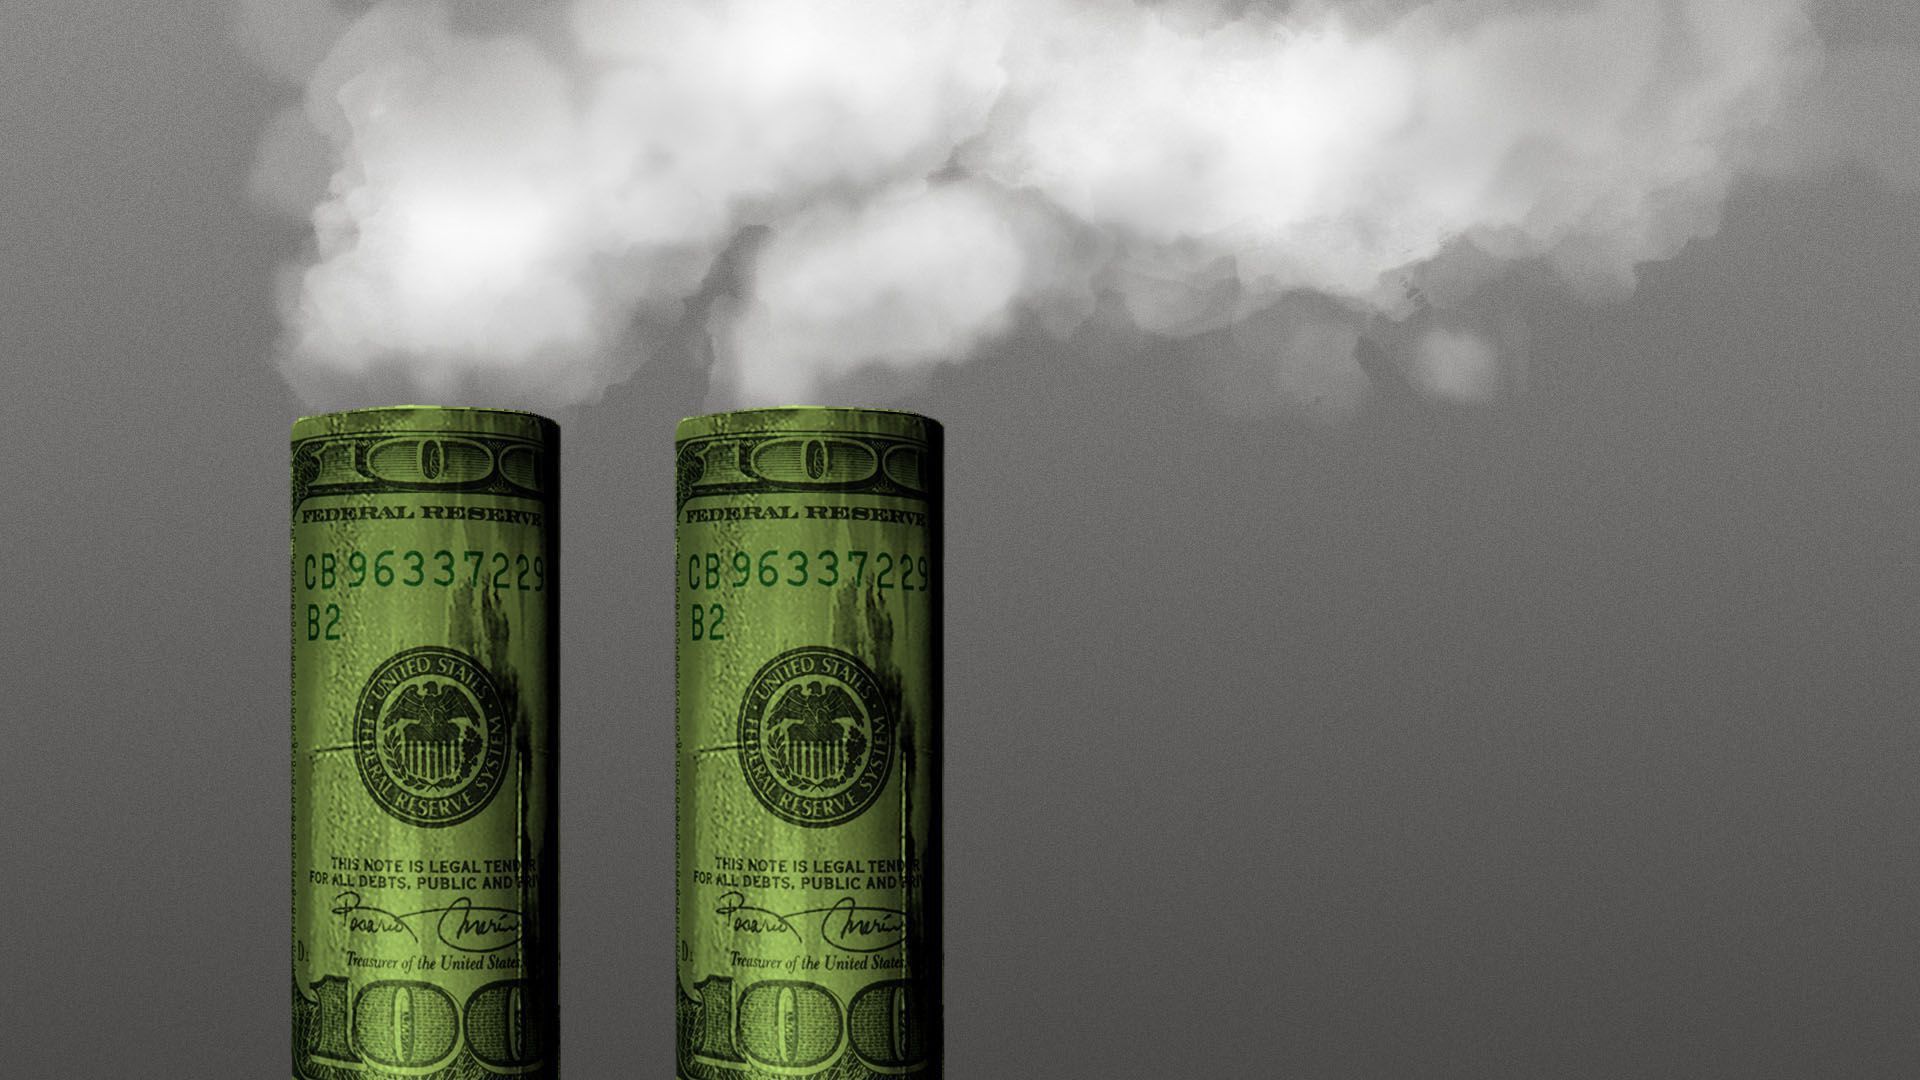 Illustration of two stacks made of money releasing smoke